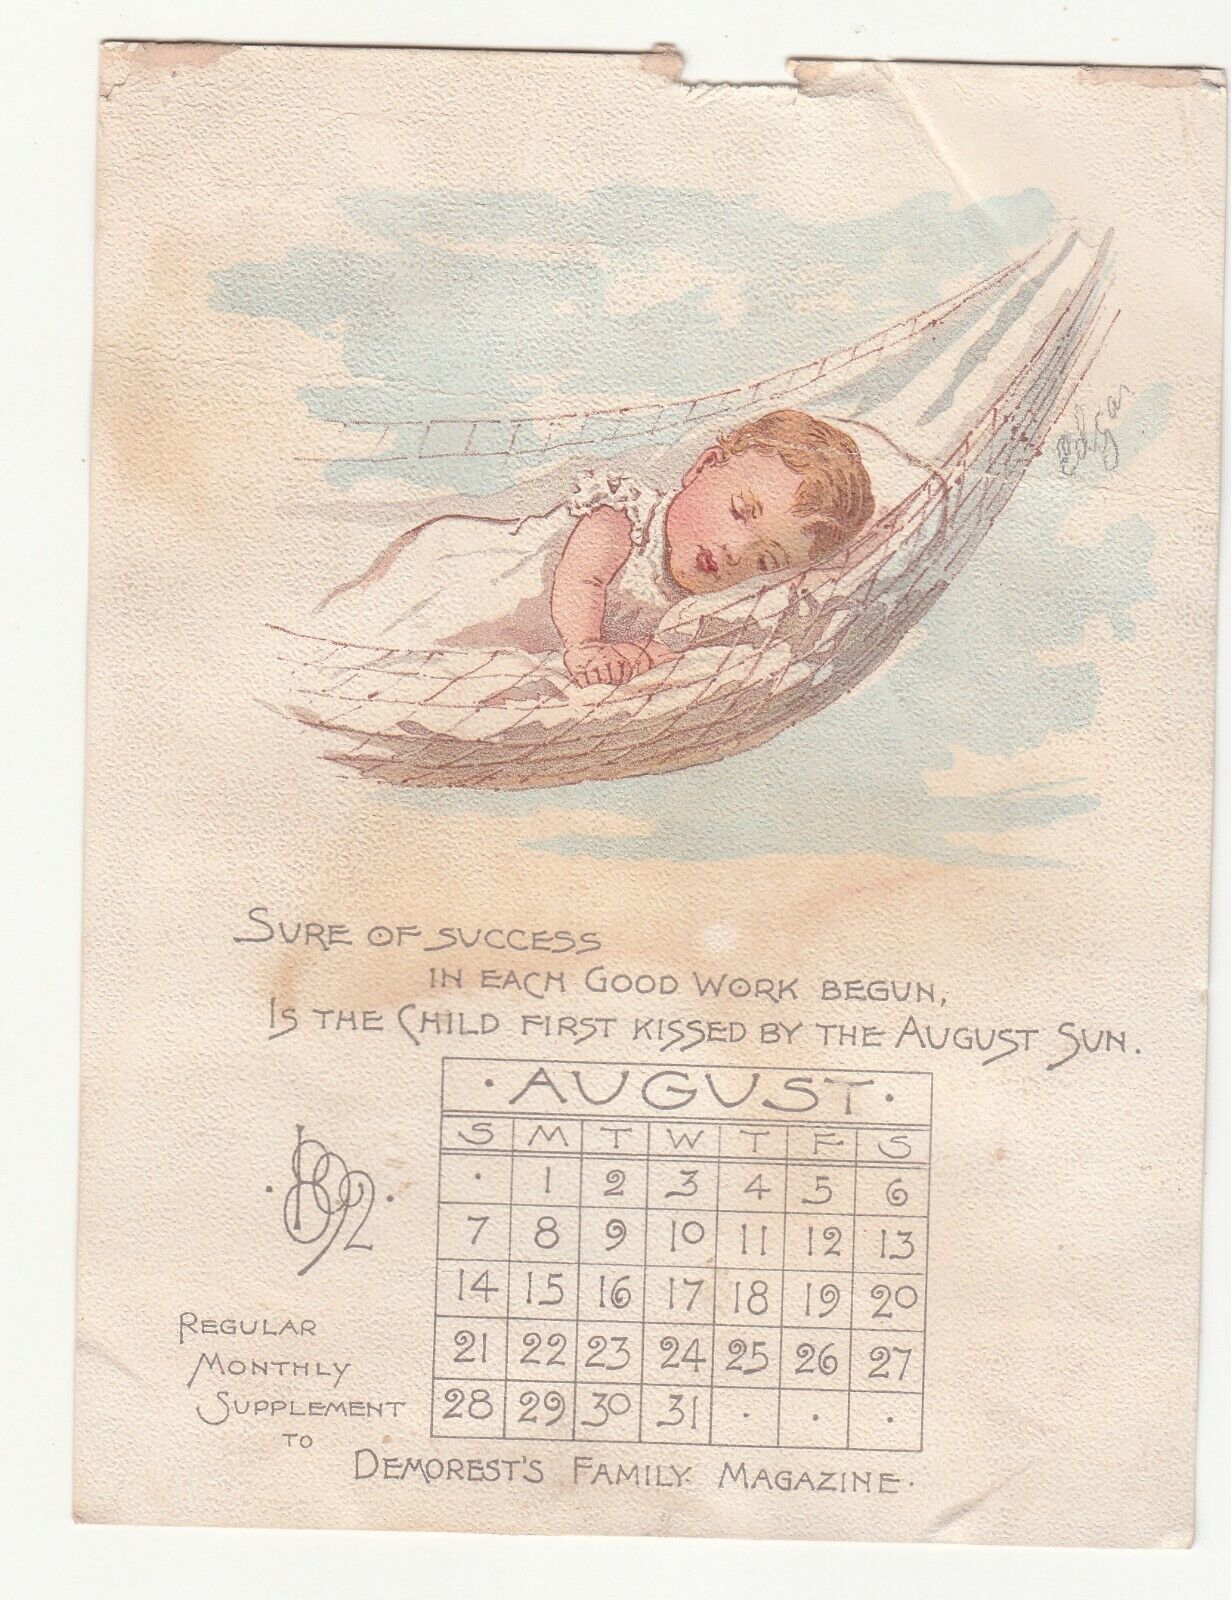 Demorest\'s Family Magazine AUGUST Baby Napping Hammock Vict Card c1880s